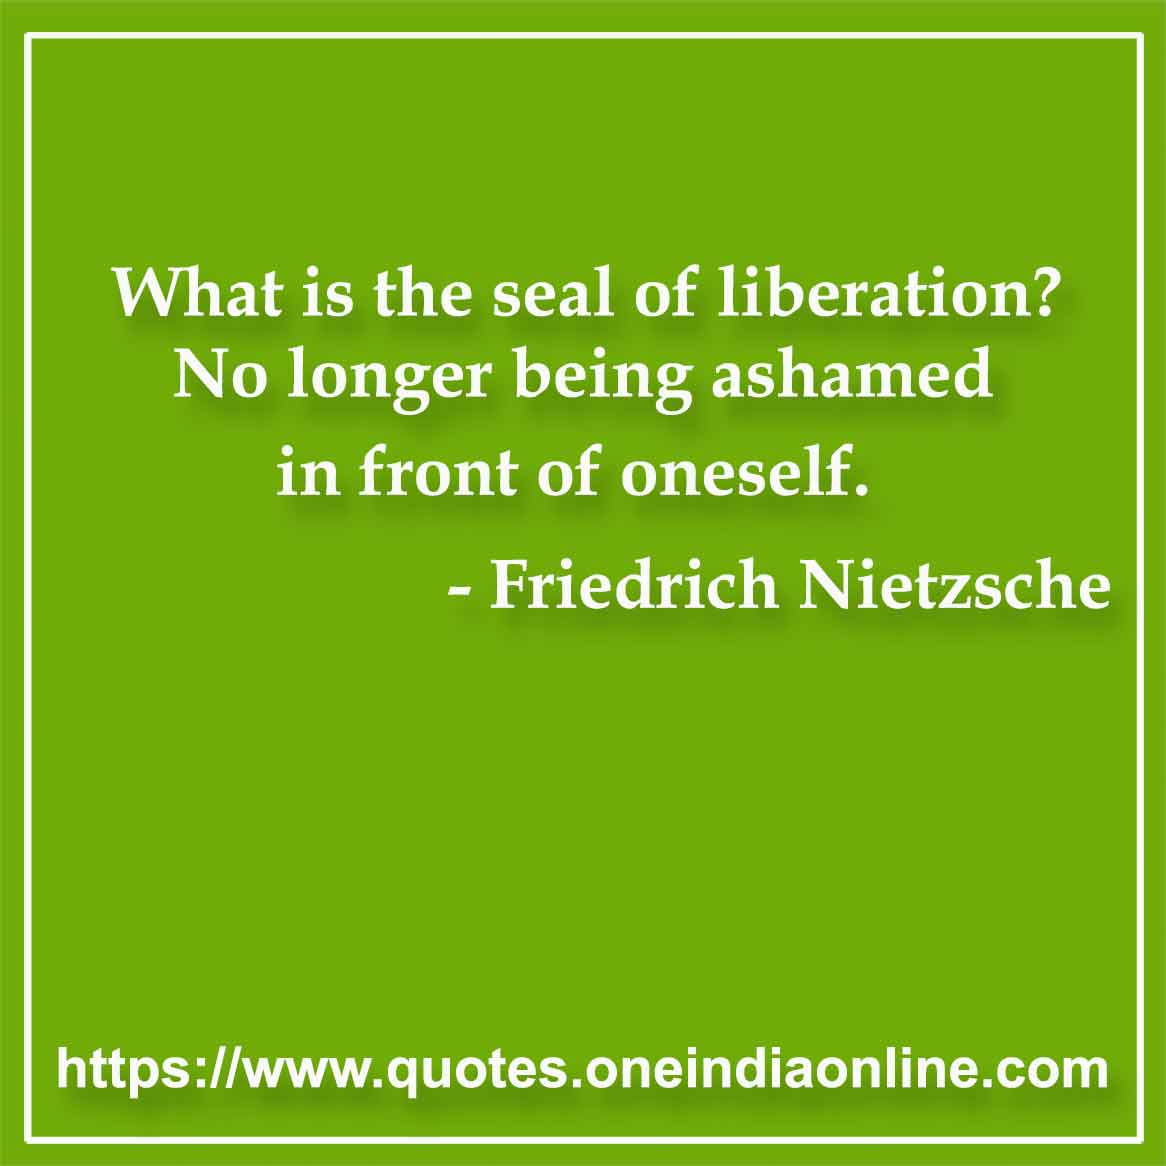 What is the seal of liberation? No longer being ashamed in front of oneself. 

- Friedrich Nietzsche